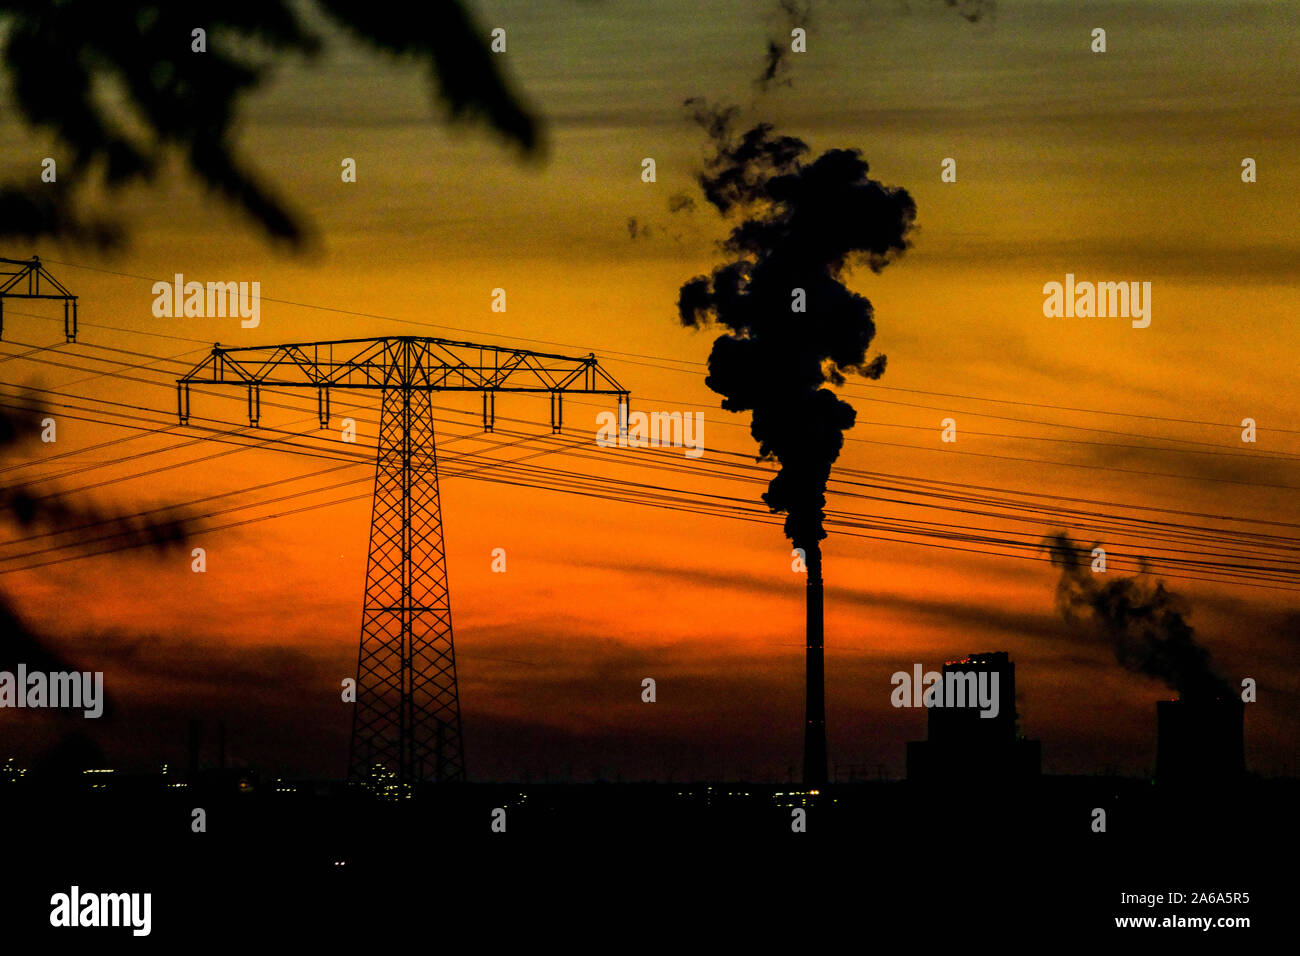 Global warming, power lines, chimney smoke at sunset Germany industry climate change carbon emissions Stock Photo